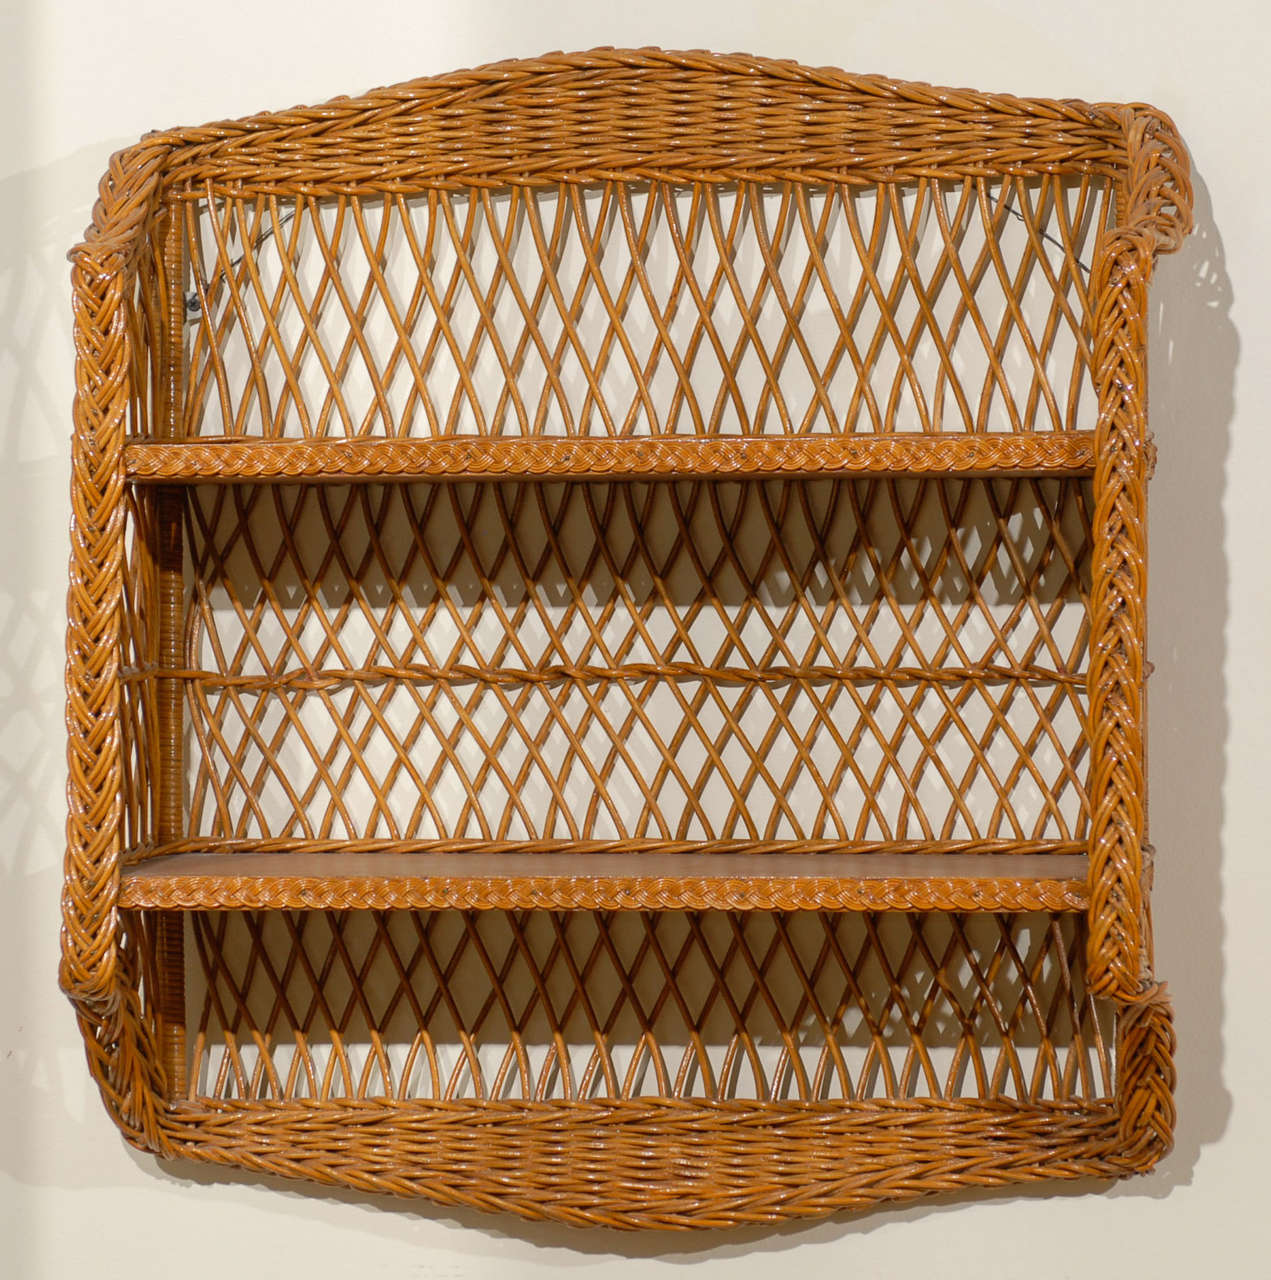 Fabulous rare American natural wicker shelf, with two wooden shelves. Circa 1915-1920 by Heyward - Wakefield.